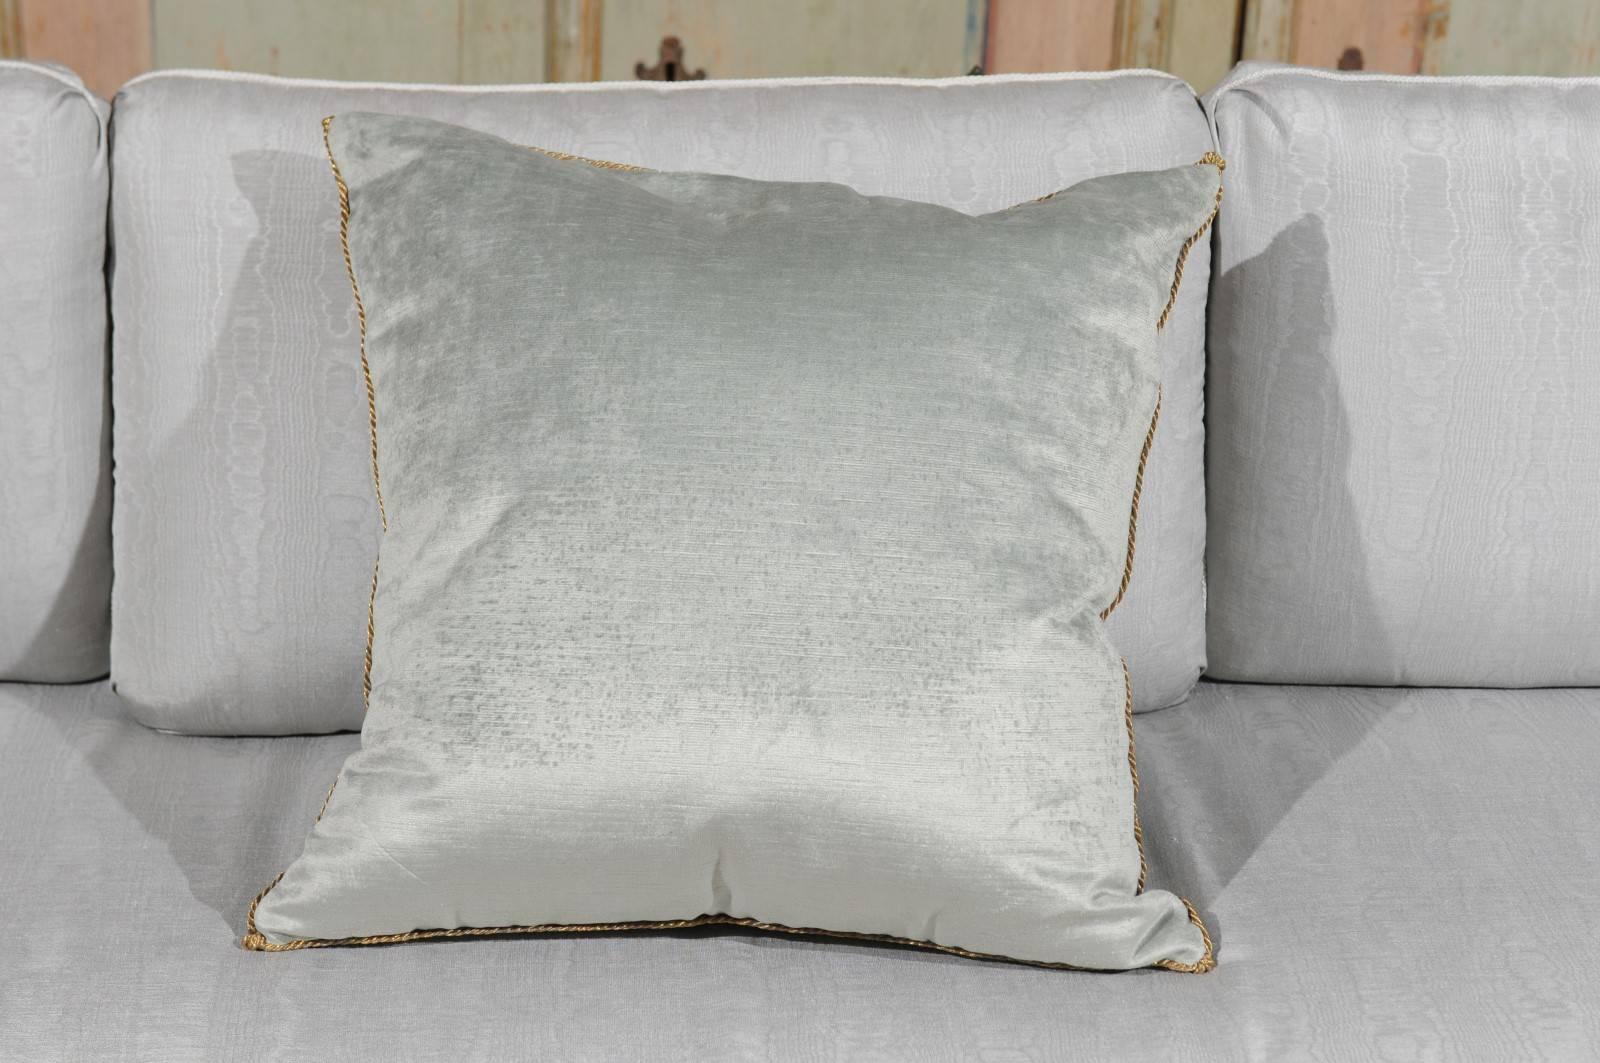 A cushion made of an antique Ottoman Empire raised gold metallic embroidery bordered with antique gold metallic gallon on pale French blue velvet. This down filled square pillow was hand trimmed with a vintage gold metallic cording knotted in the